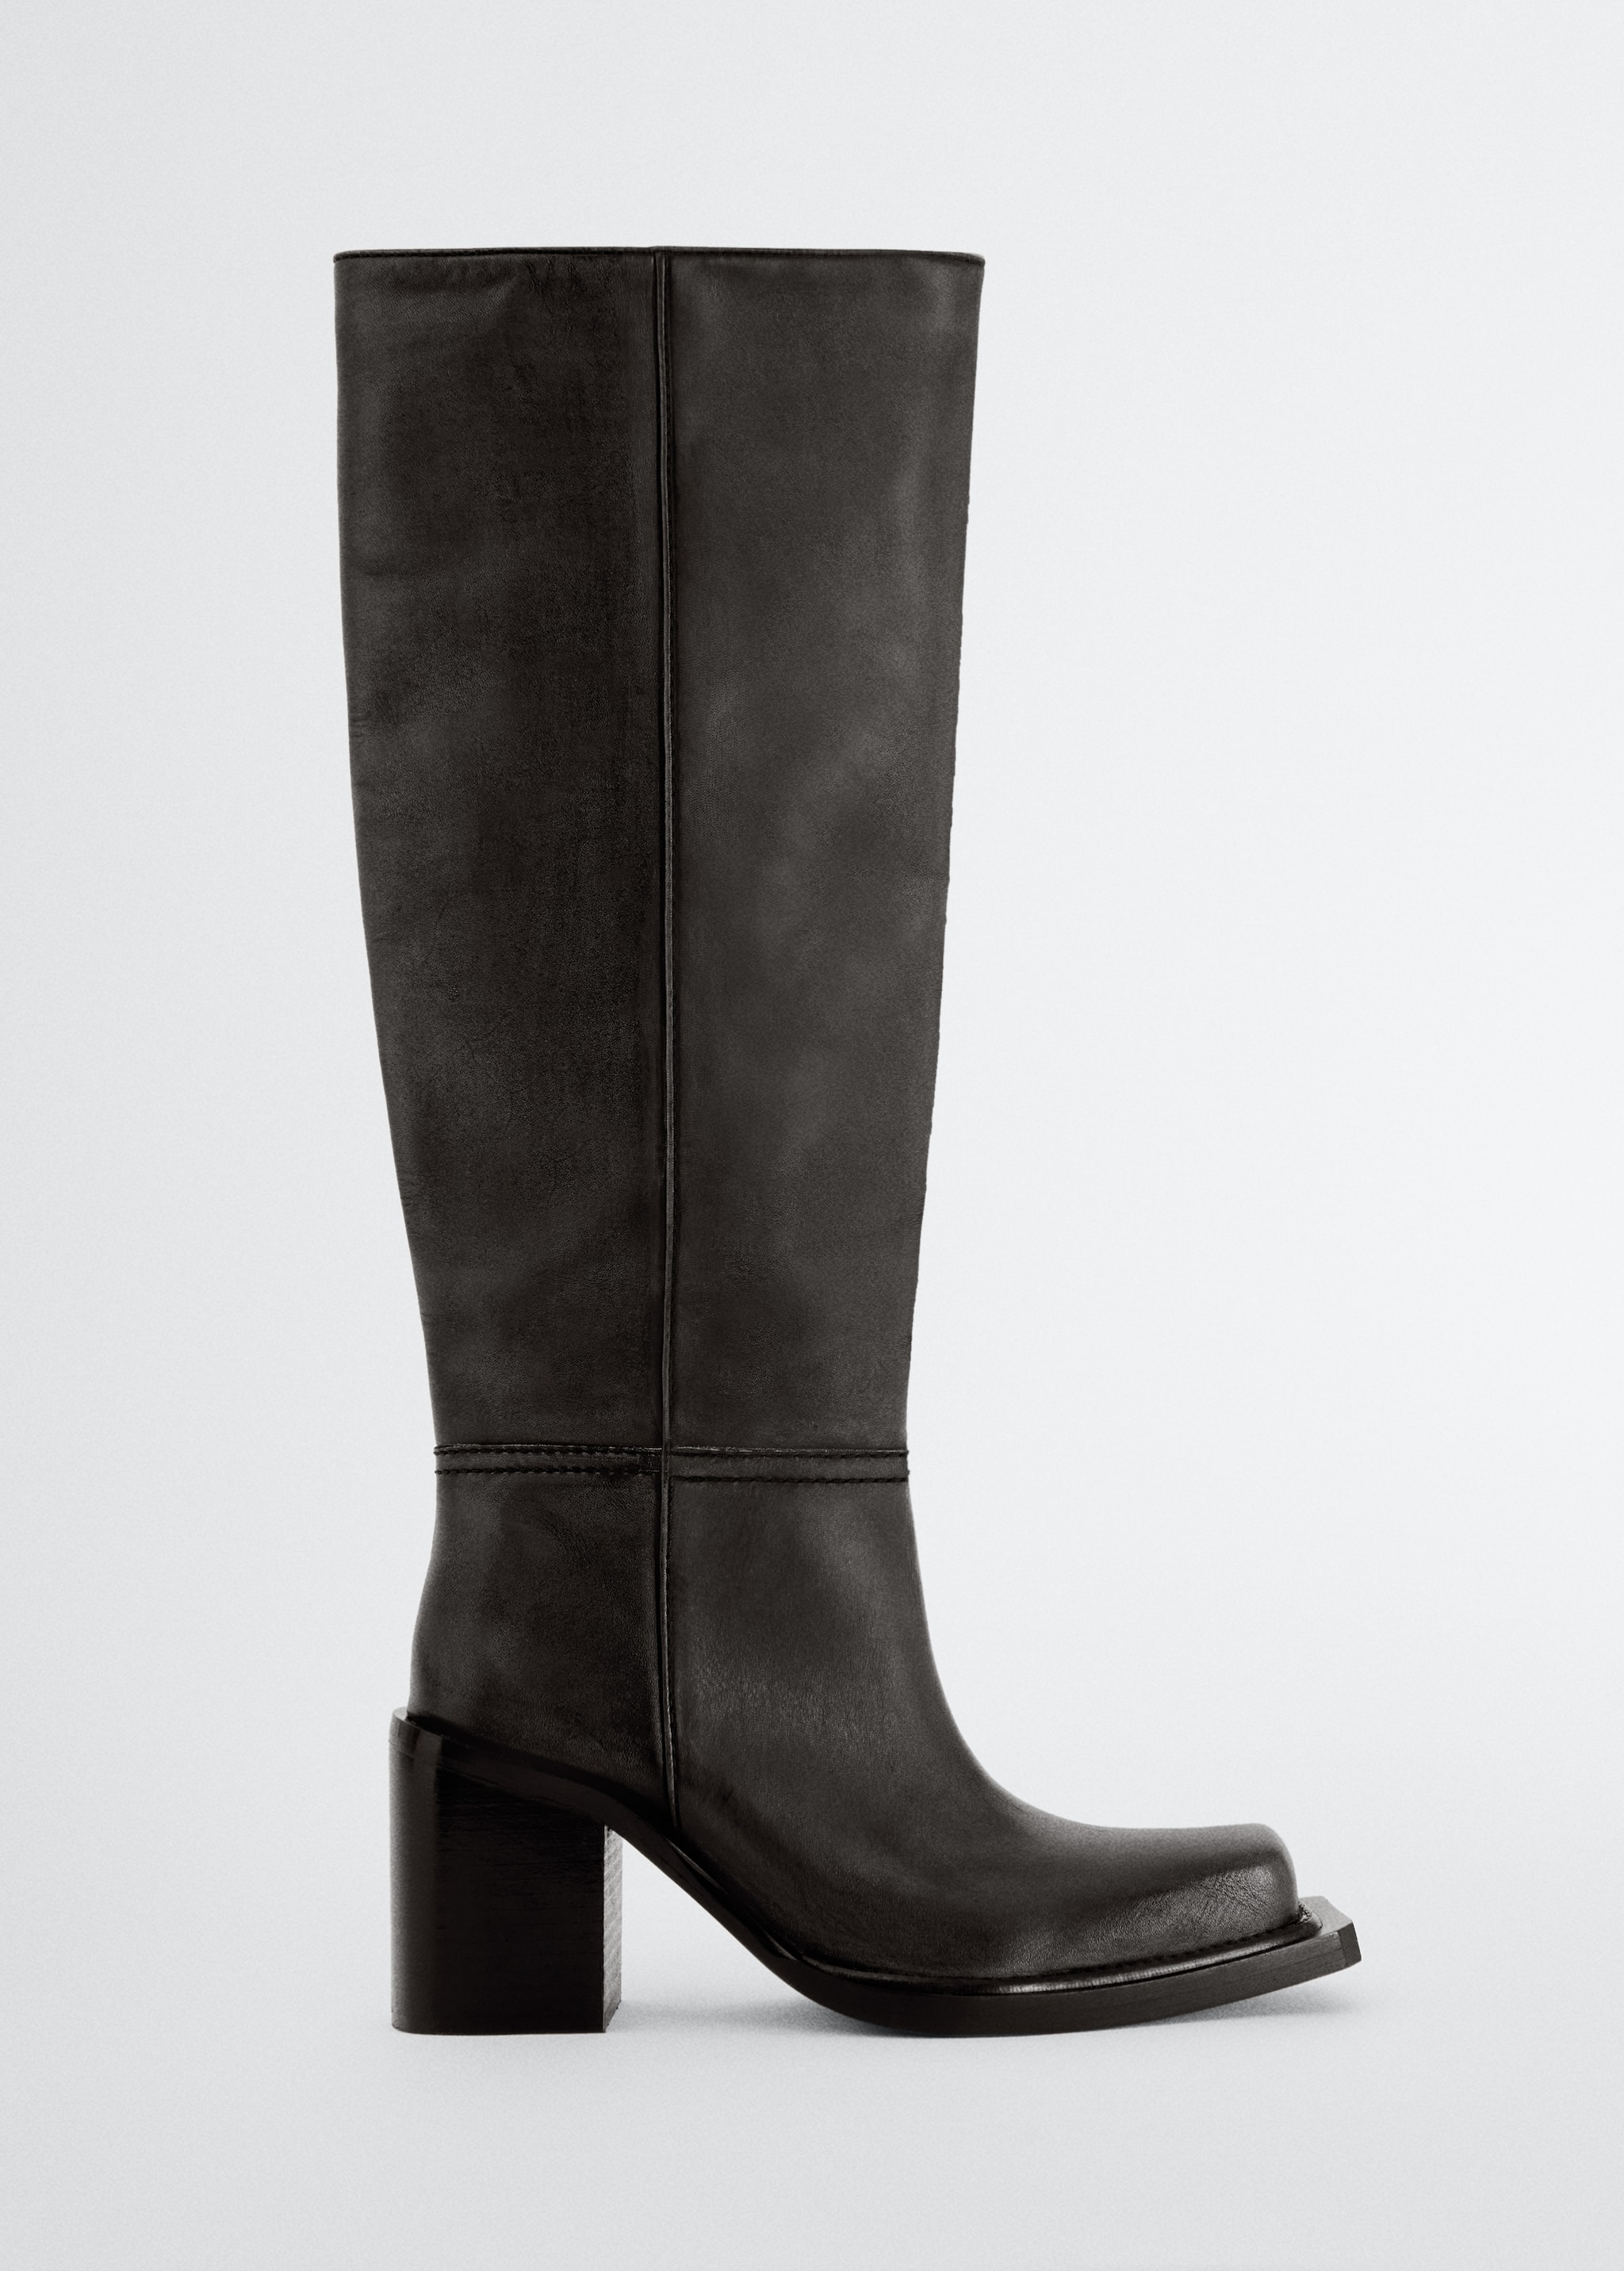 Leather boots with tall leg - Article without model